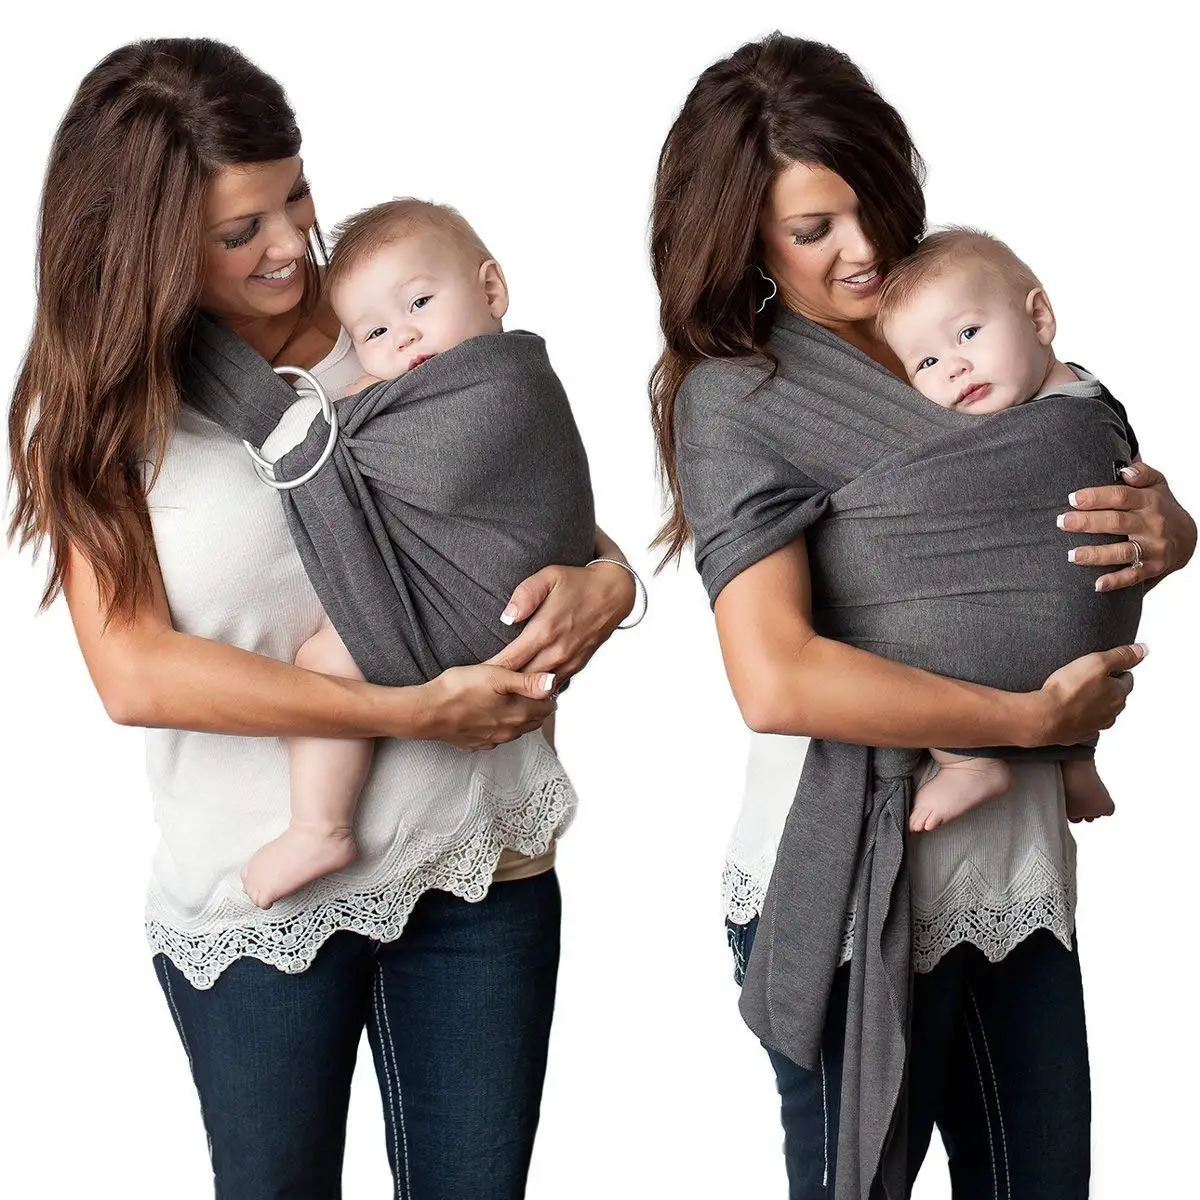 Baby Ring Sling Wrap Baby Carrier - Buy 